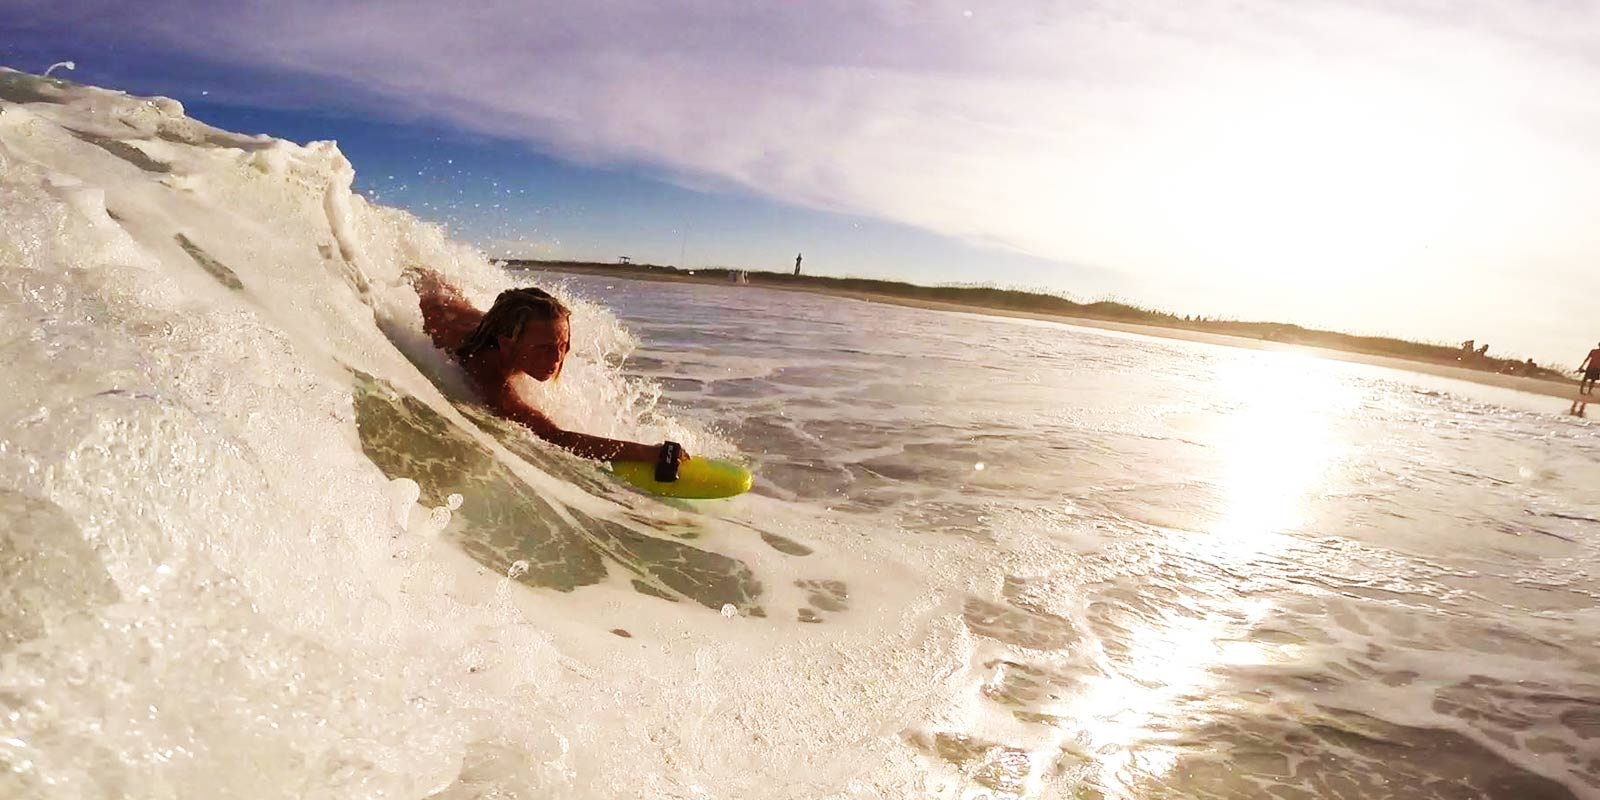 AN OUTER BANKS SUMMER ODYSSEY- SCOUTING THE INFAMOUS OUTER BANKS, NC with KEATON BILLINGS